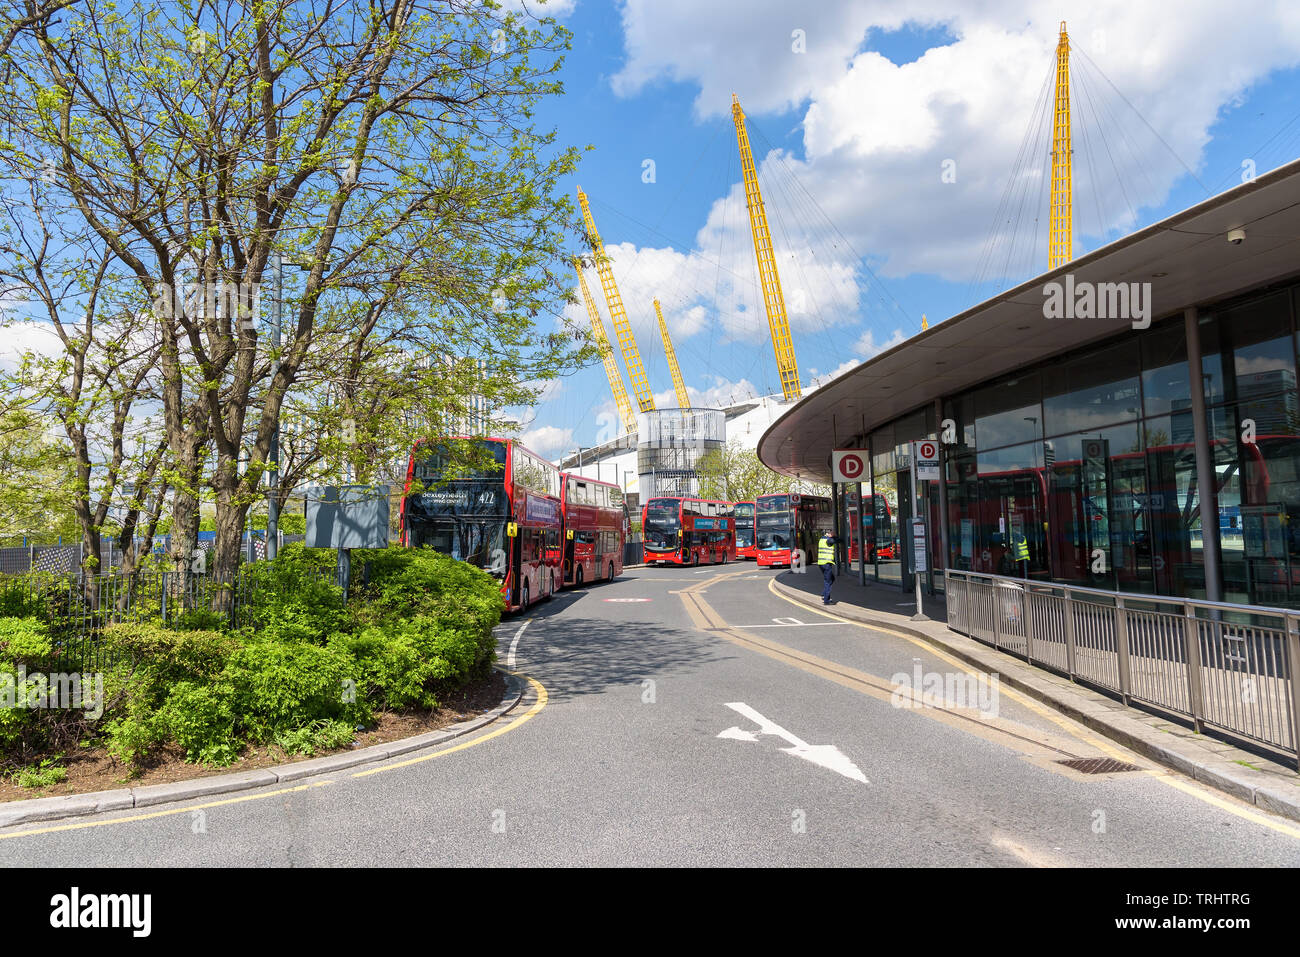 London, UK - May 1, 2018: Red double decker buses wait for passengers in front of the North Greenwich station Stock Photo